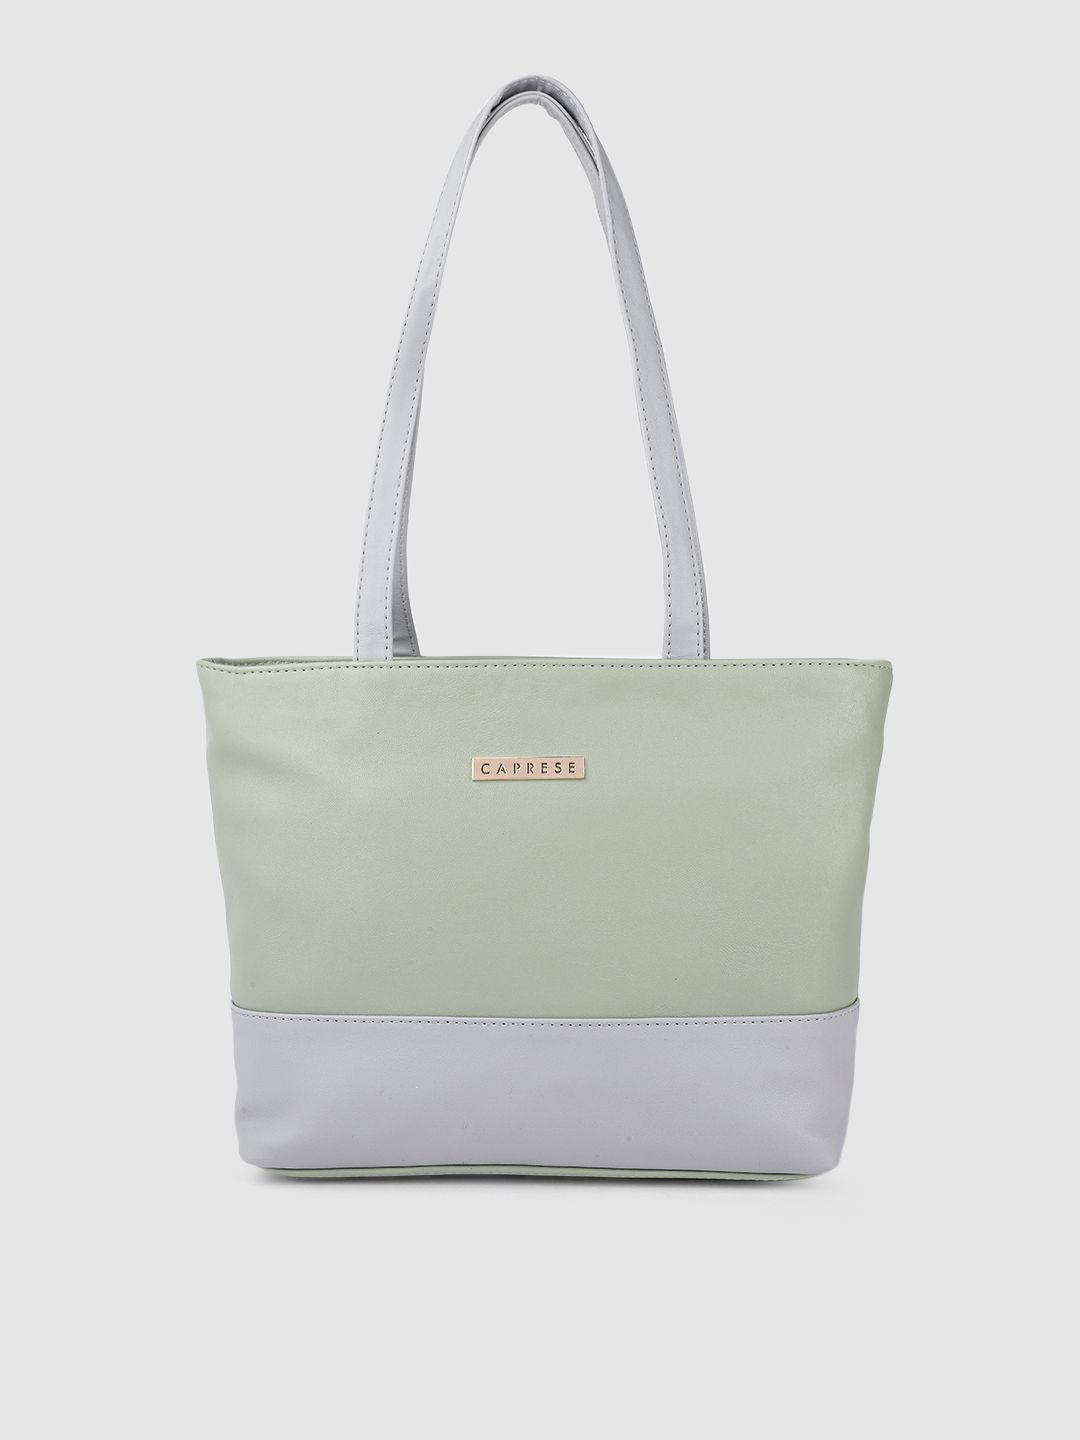 Caprese Mint Green & Grey Colourblocked PU Structured Shoulder Bag Price in India